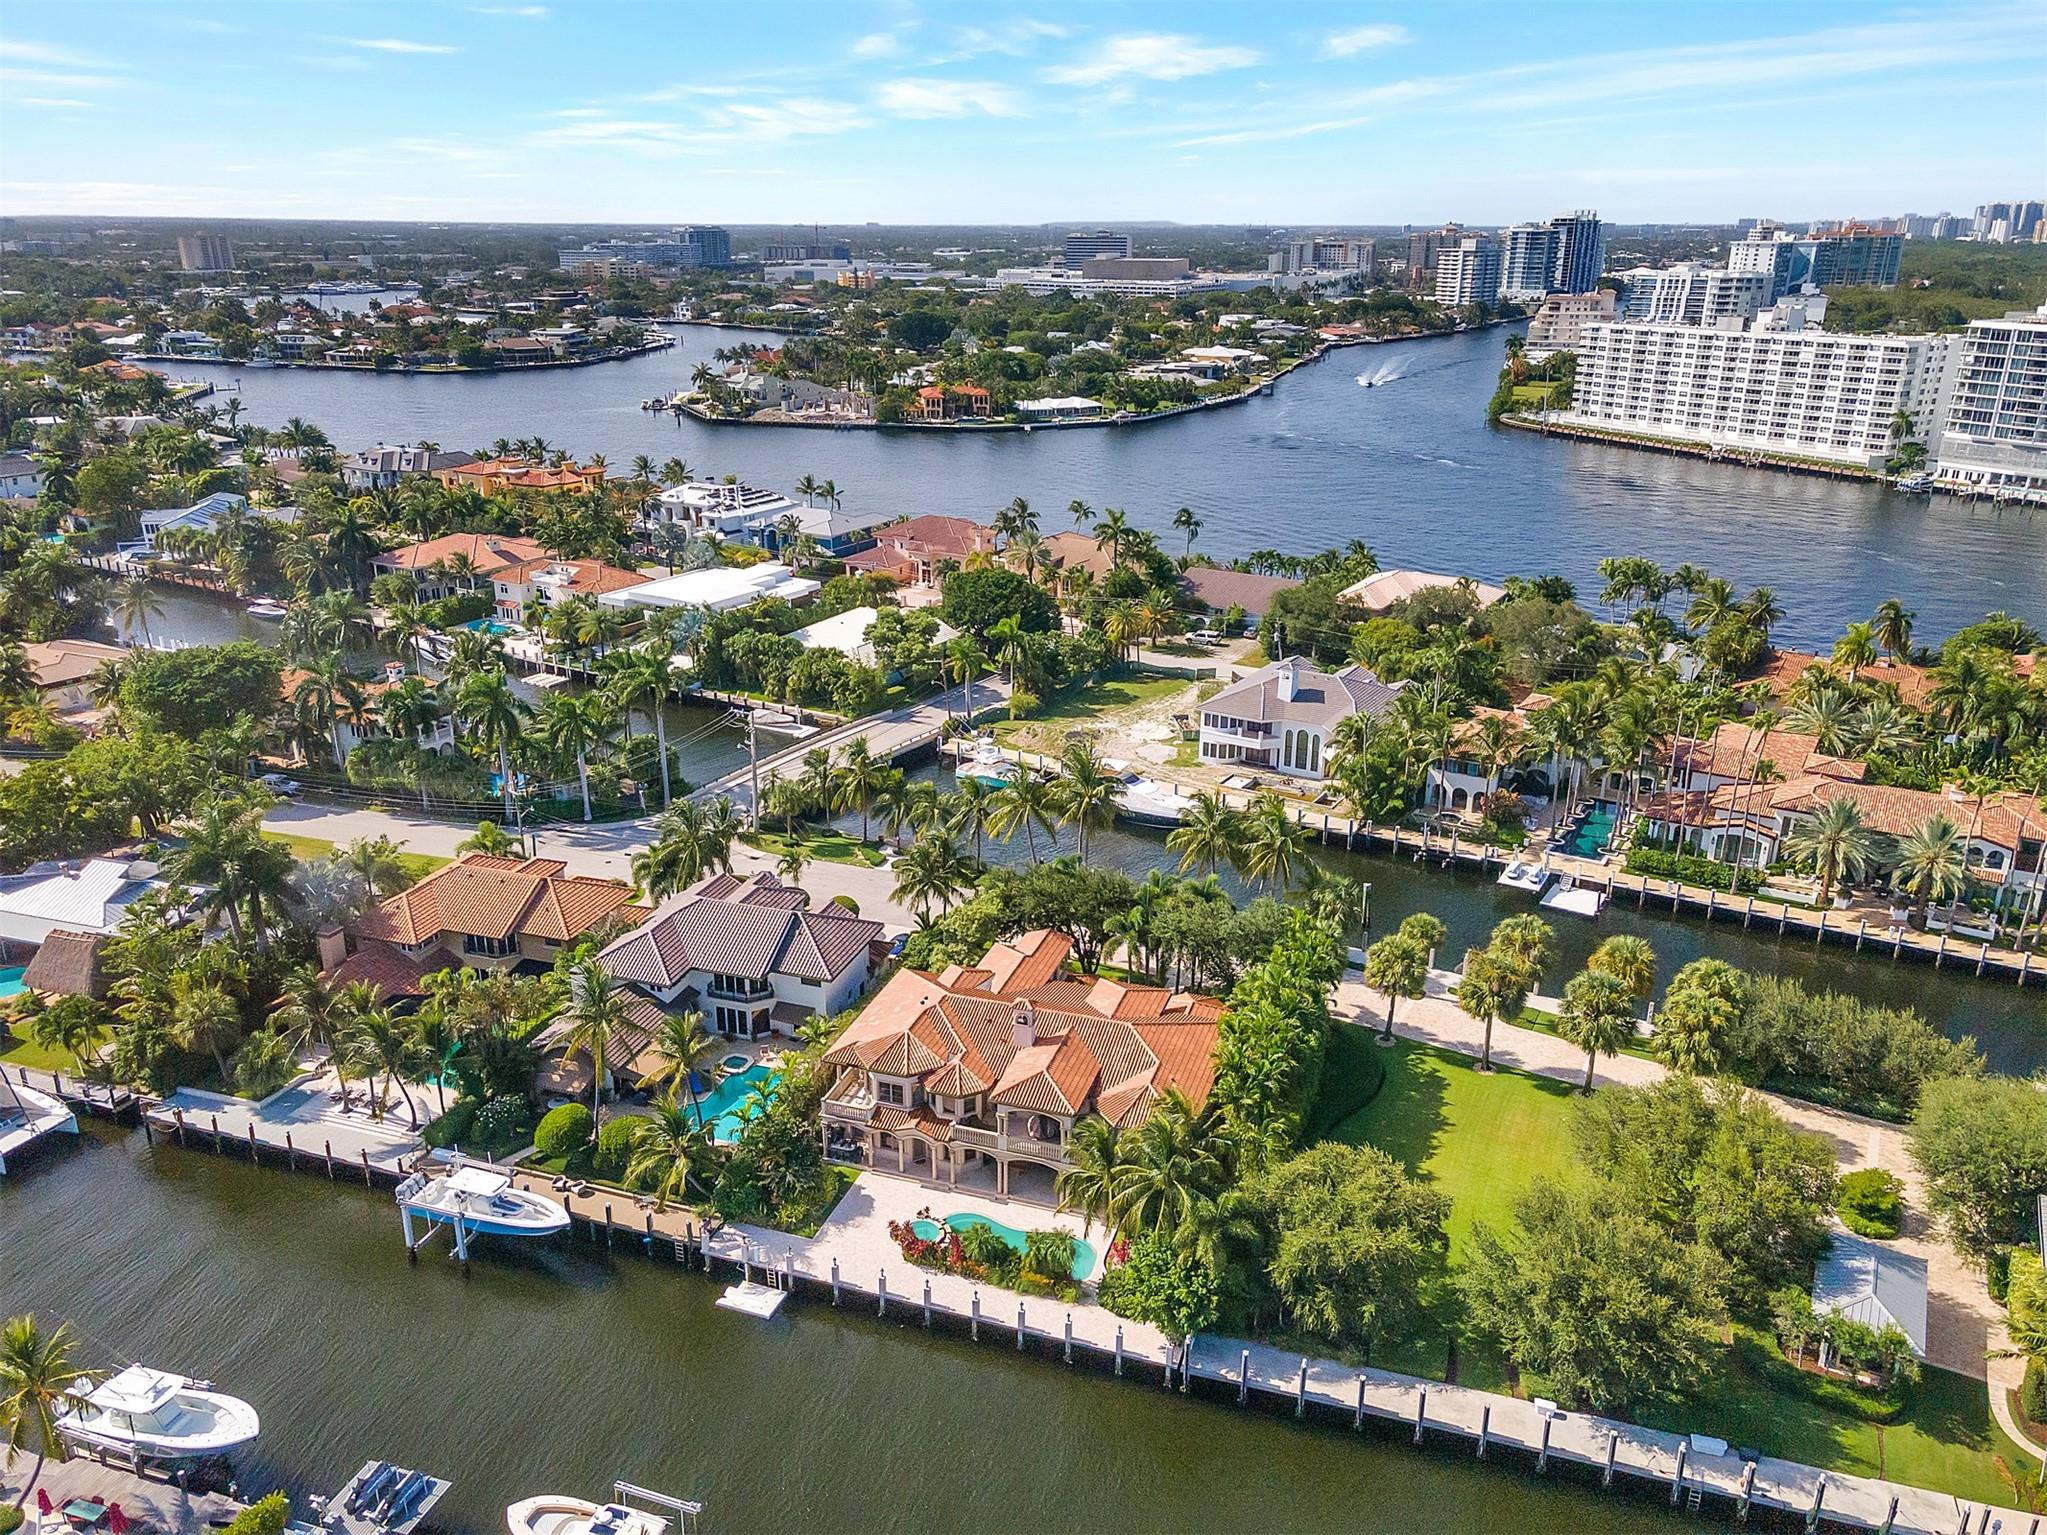 Stunning Seven Isles Gated Waterfront Estate, on private gated street, one off intracoastal point, 100' of waterfront on south canal and 103' on north canal, 203' combined for multiple yachts of 80'-83'. Water Views from each bedroom, curved marble Iron Staircase, marble and wood floors, chef's kitchen, fabulous great room with 20' ceilings and 2 story stone fireplace. Main suite features his and her baths, sitting room and morning bar, 2 balconies. Guest suite on 1st Floor. Beautiful, expansive outdoor covered area with tumbled marble patio, and heated pool. Estate features 5 bed, 7.5 bath, office, theater, basement, 3CG, elevator, Lutron Lighting. Guardhouse at Seven Isles entrance offers security with high res camera recording vehicle tags. Walk to Las Olas, beach, dining, and shopping.